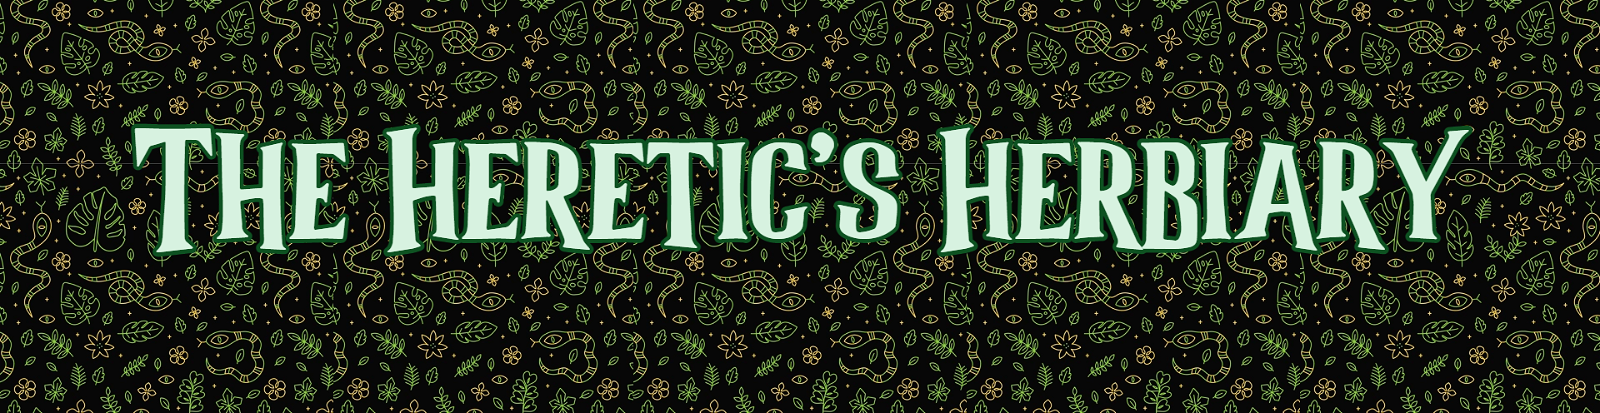 The Heretic's Herbiary vol #05